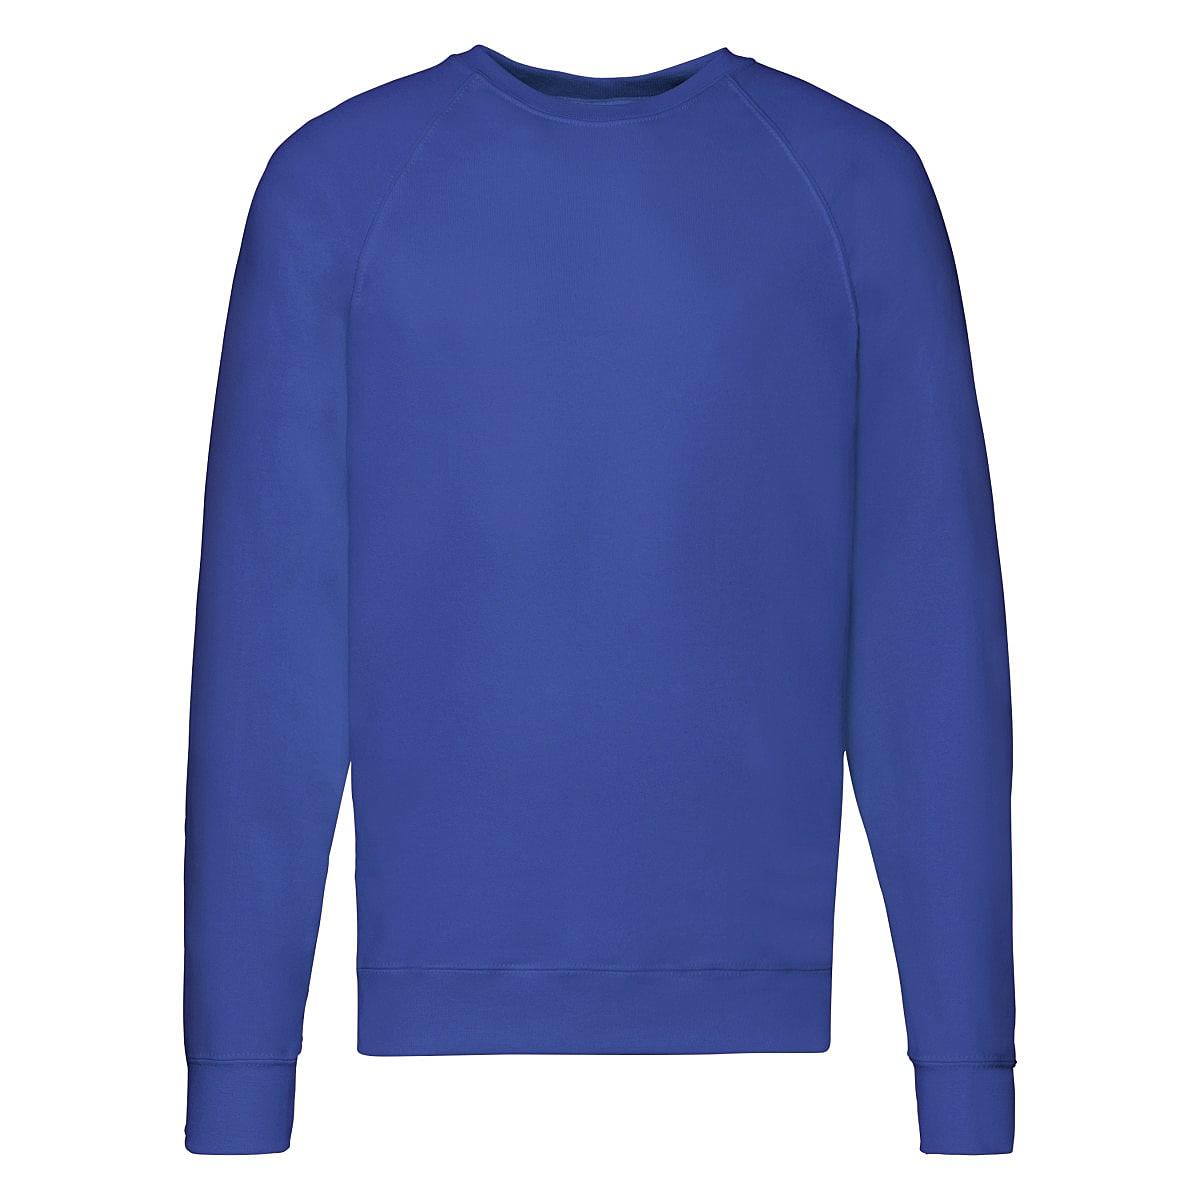 Fruit Of The Loom Mens Lightweight Raglan Sweater in Royal Blue (Product Code: 62138)